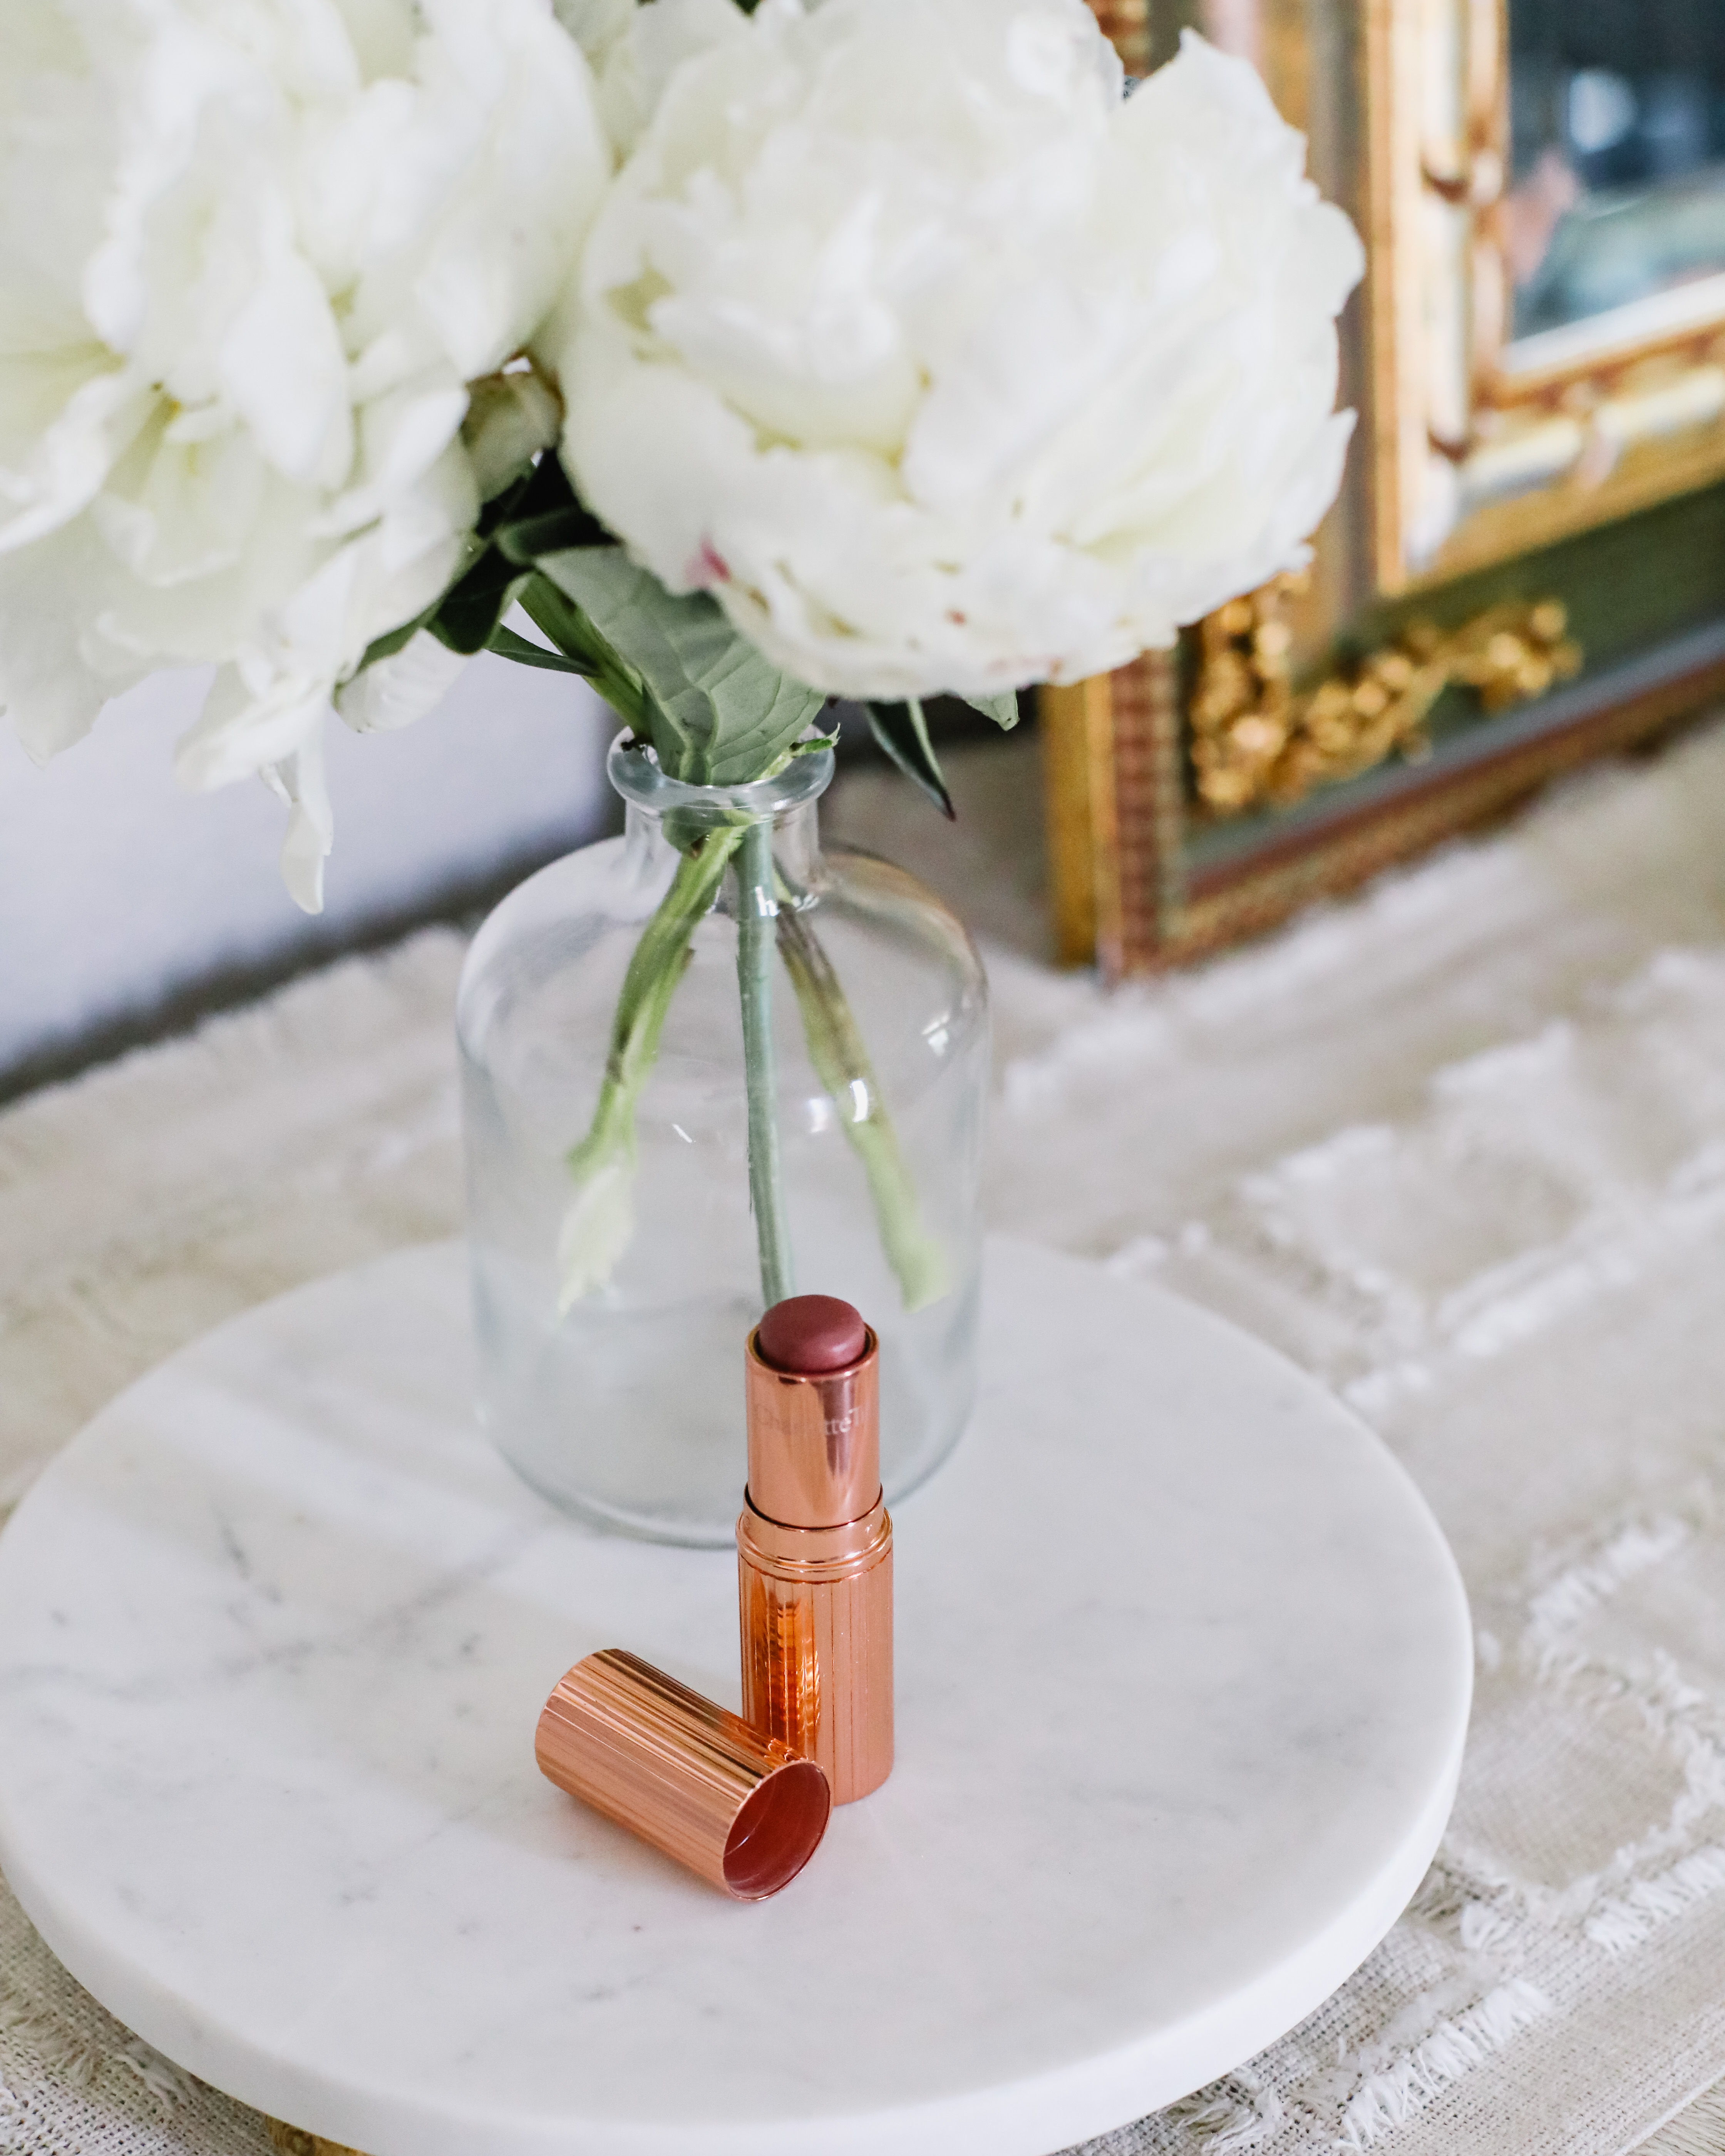 Charlotte Tilbury Pillow Talk Original Matte Revolution Lipstick | High End Makeup Products Actually Worth the Splurge. Best Beauty Products That Are Worth the Hype .